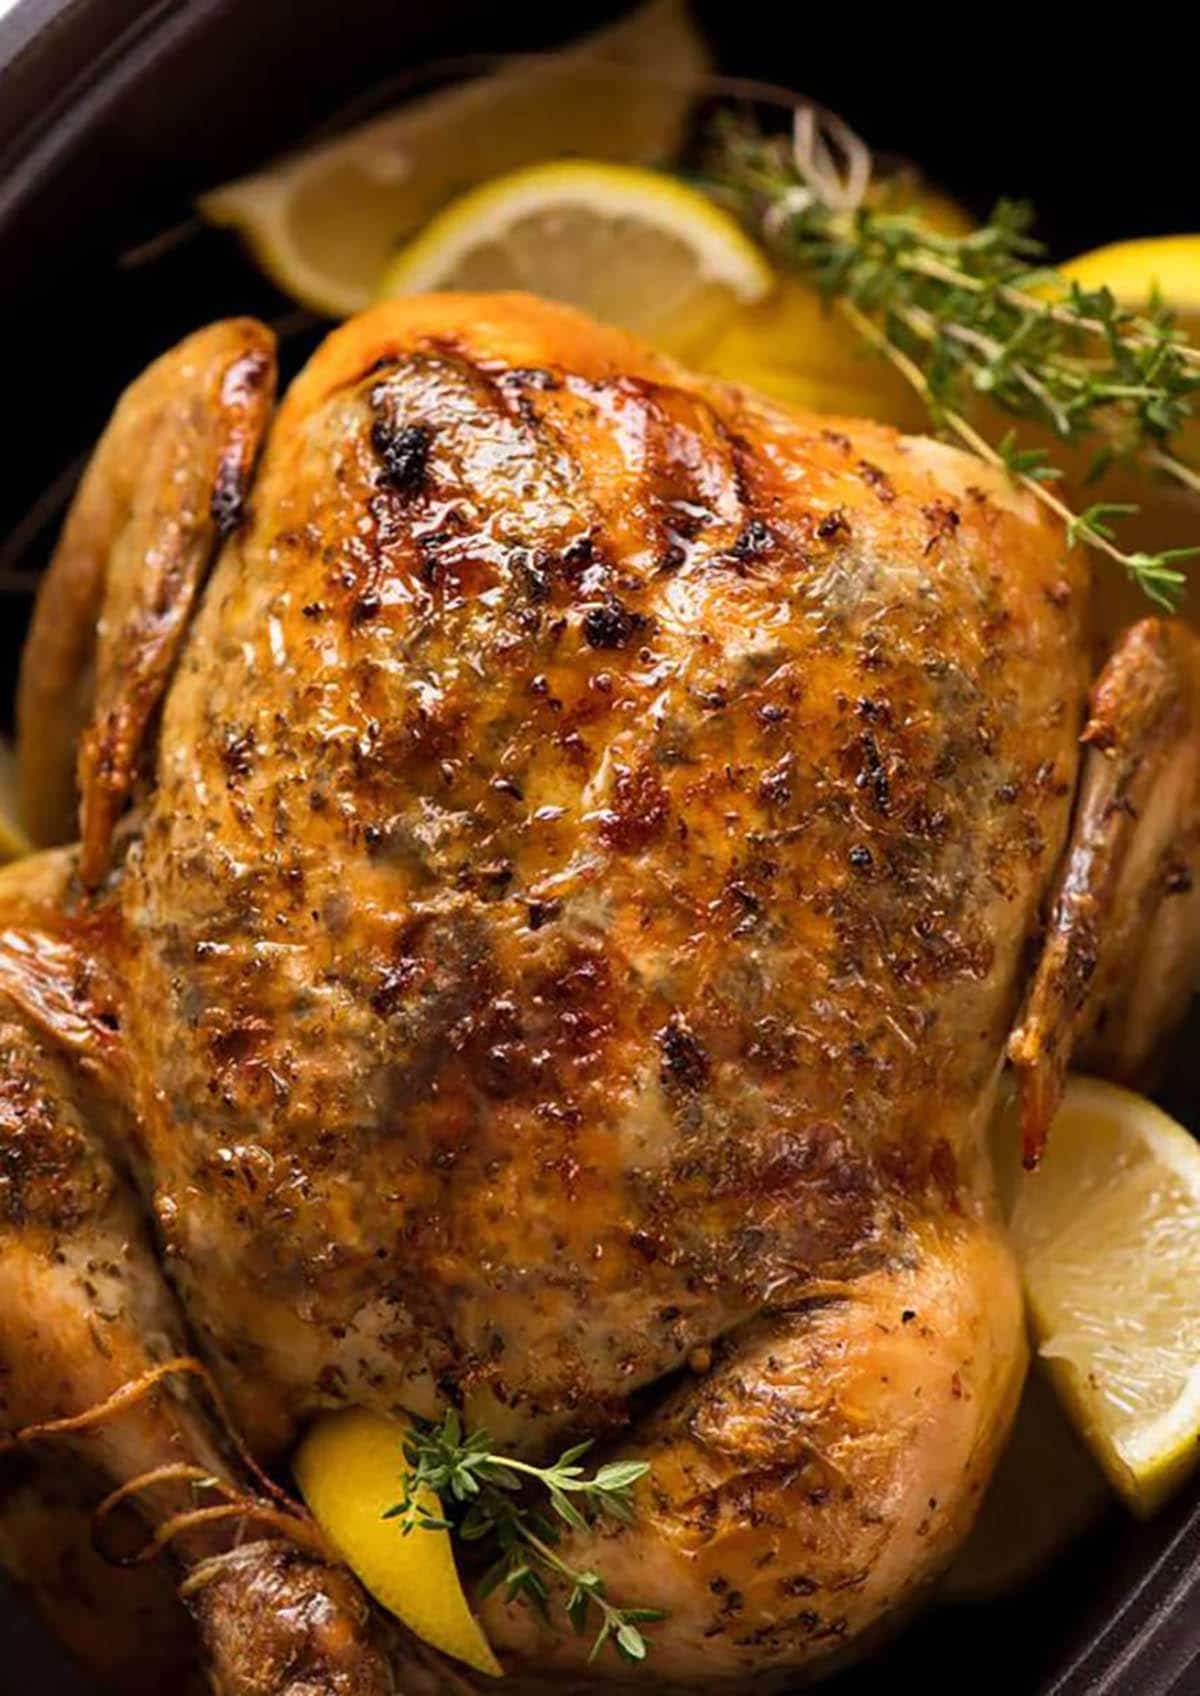 Roasted chicken with thyme and lemon slices